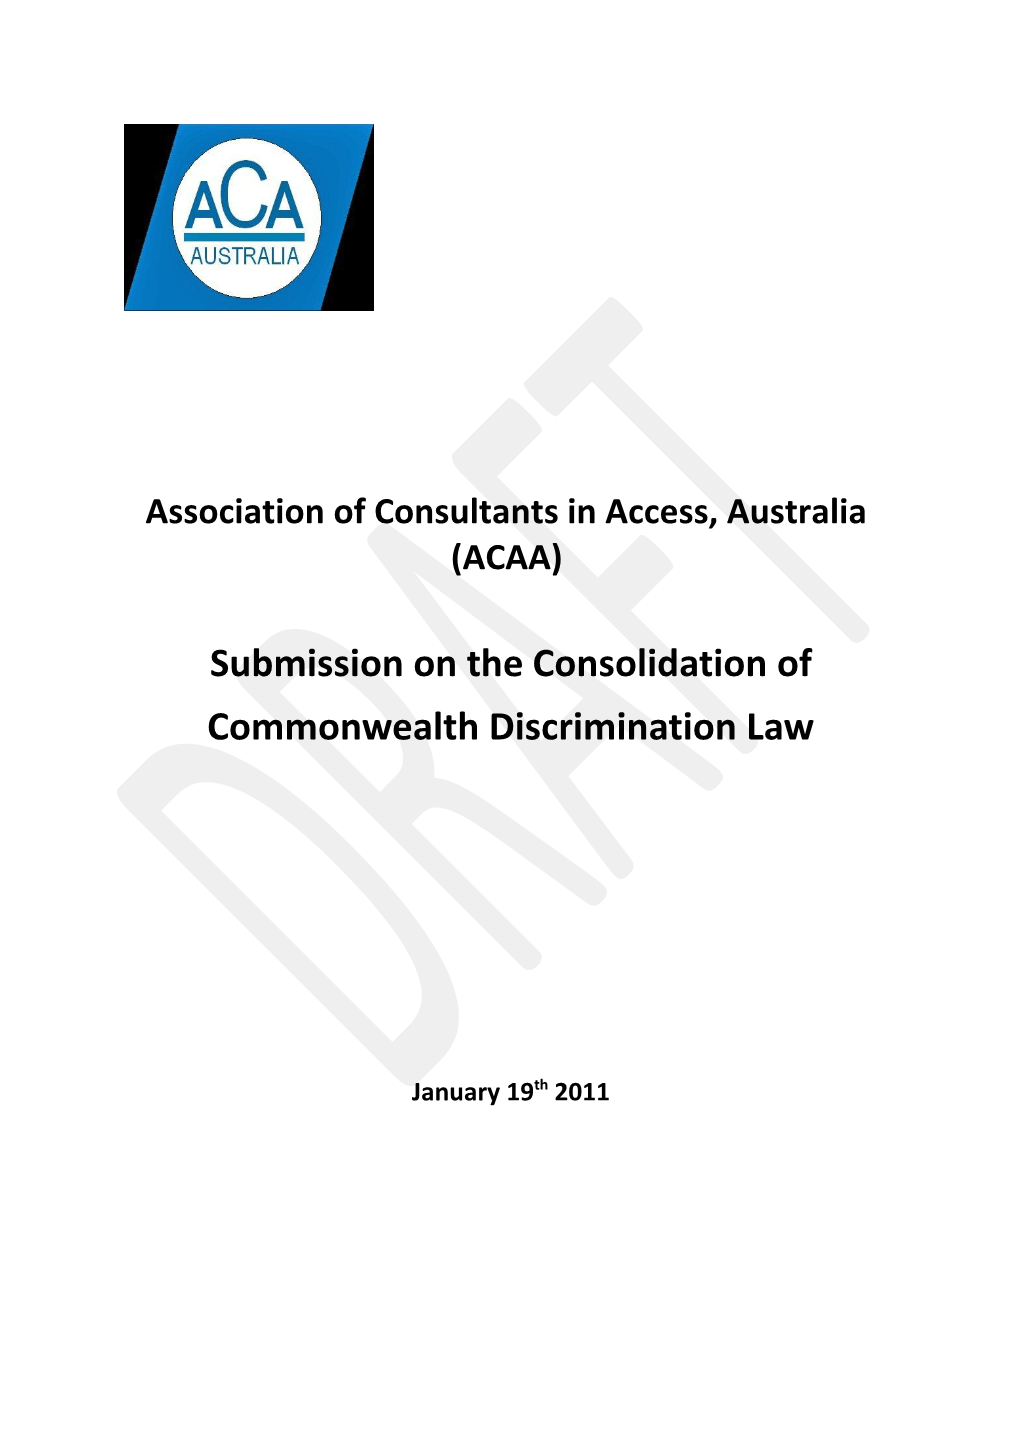 Submission on the Consolidation of Commonwealth Anti-Discrimination Laws - Association